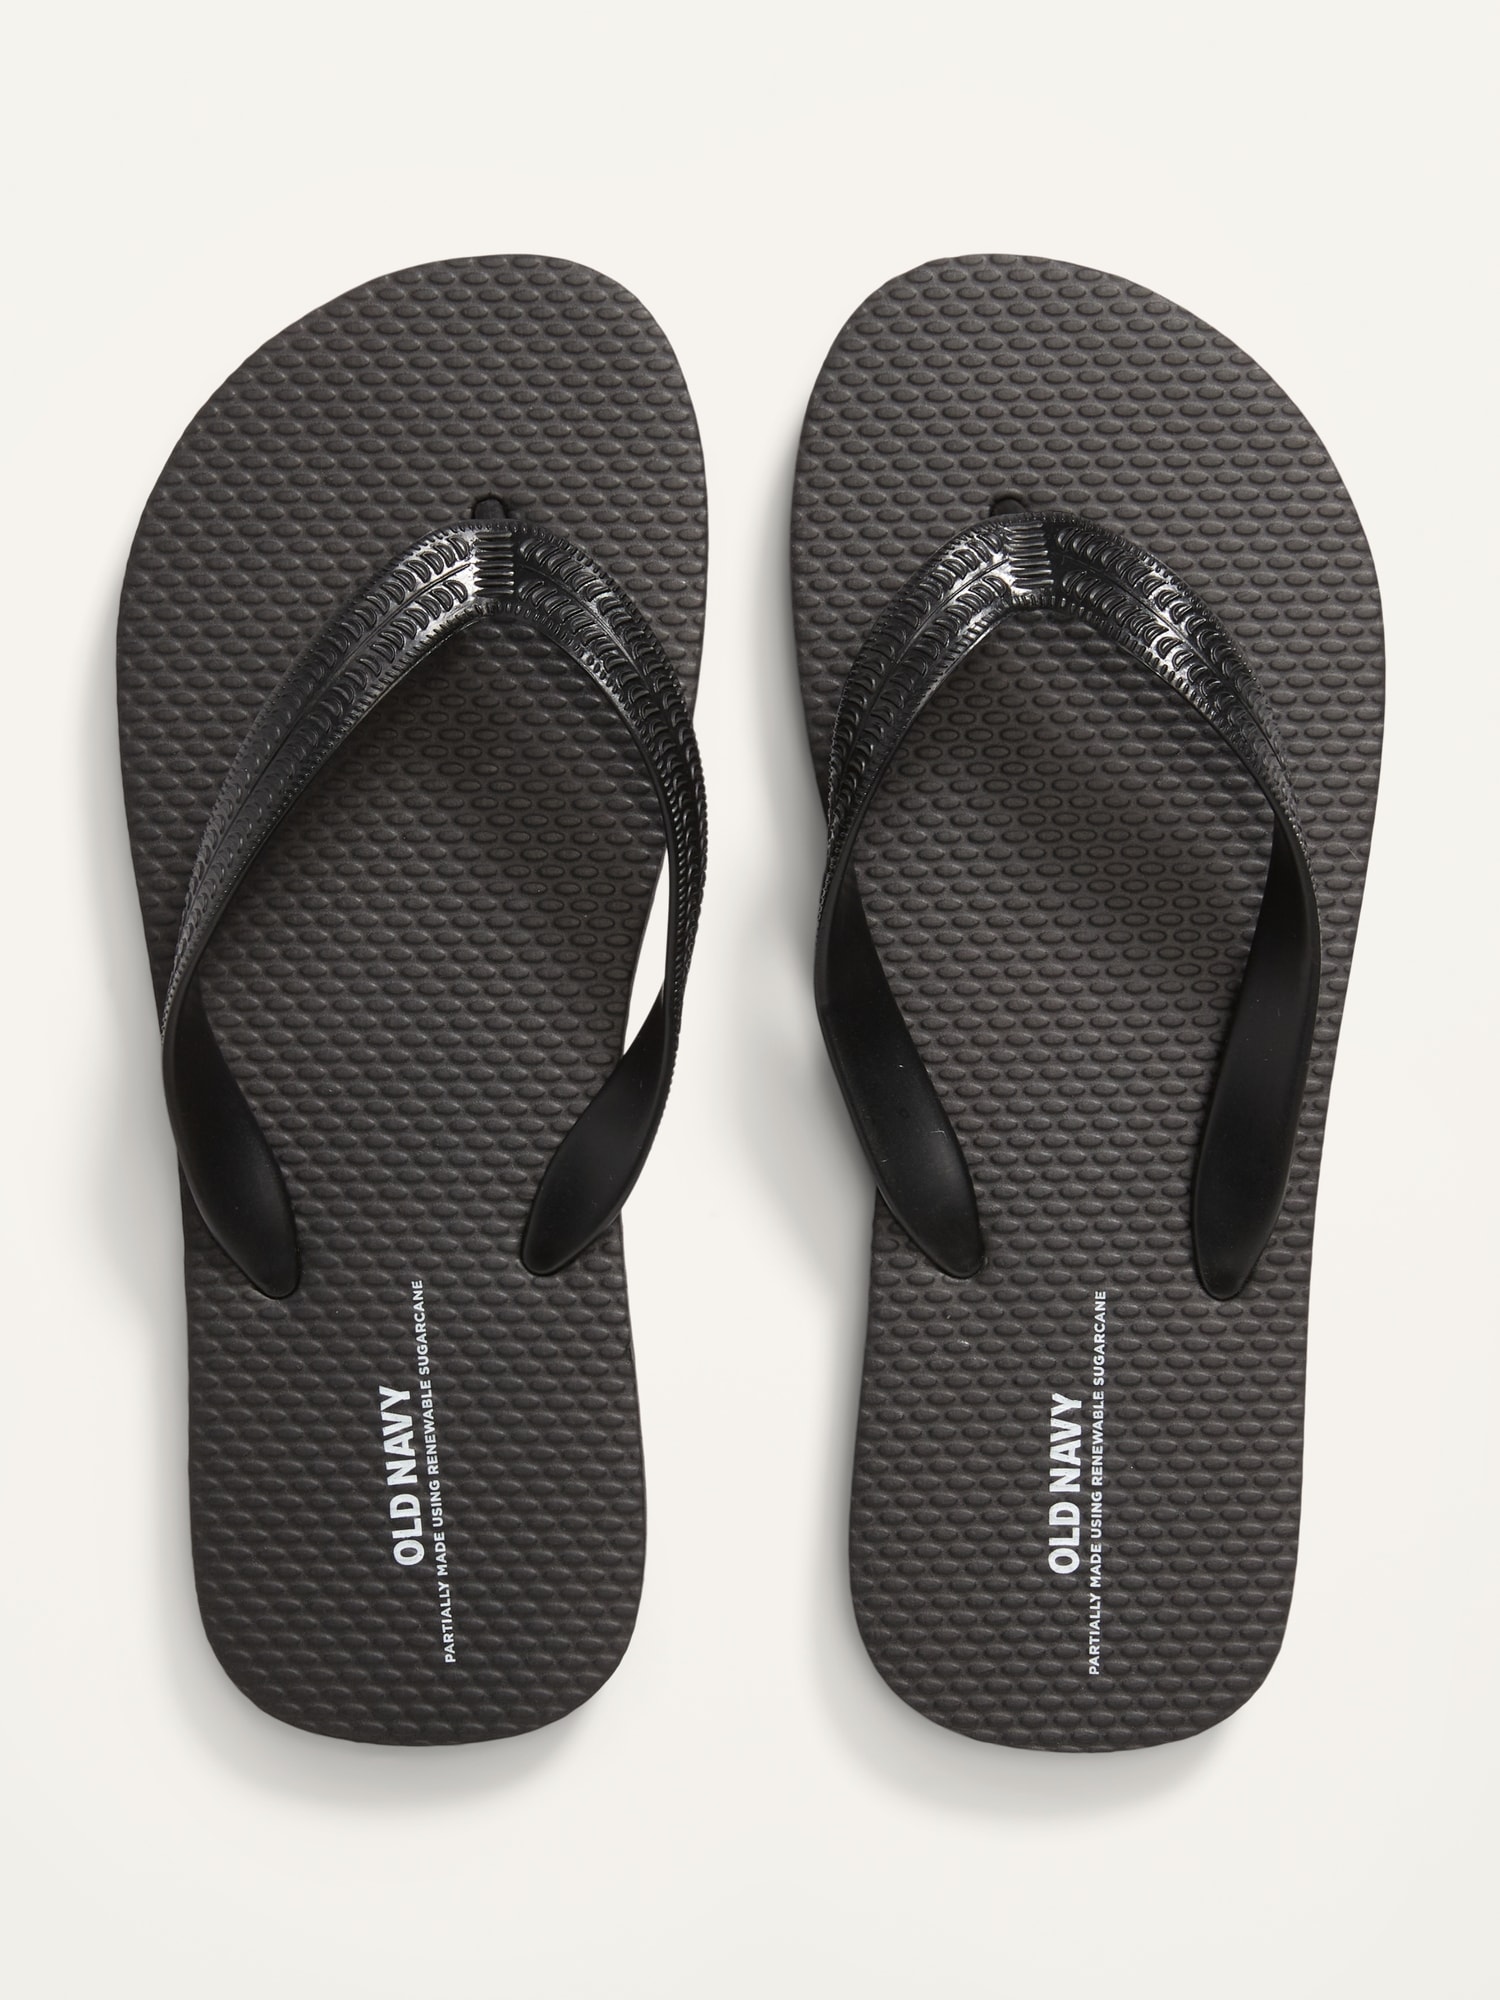 Flip-Flop Sandals 3-Pack (Partially Plant-Based)